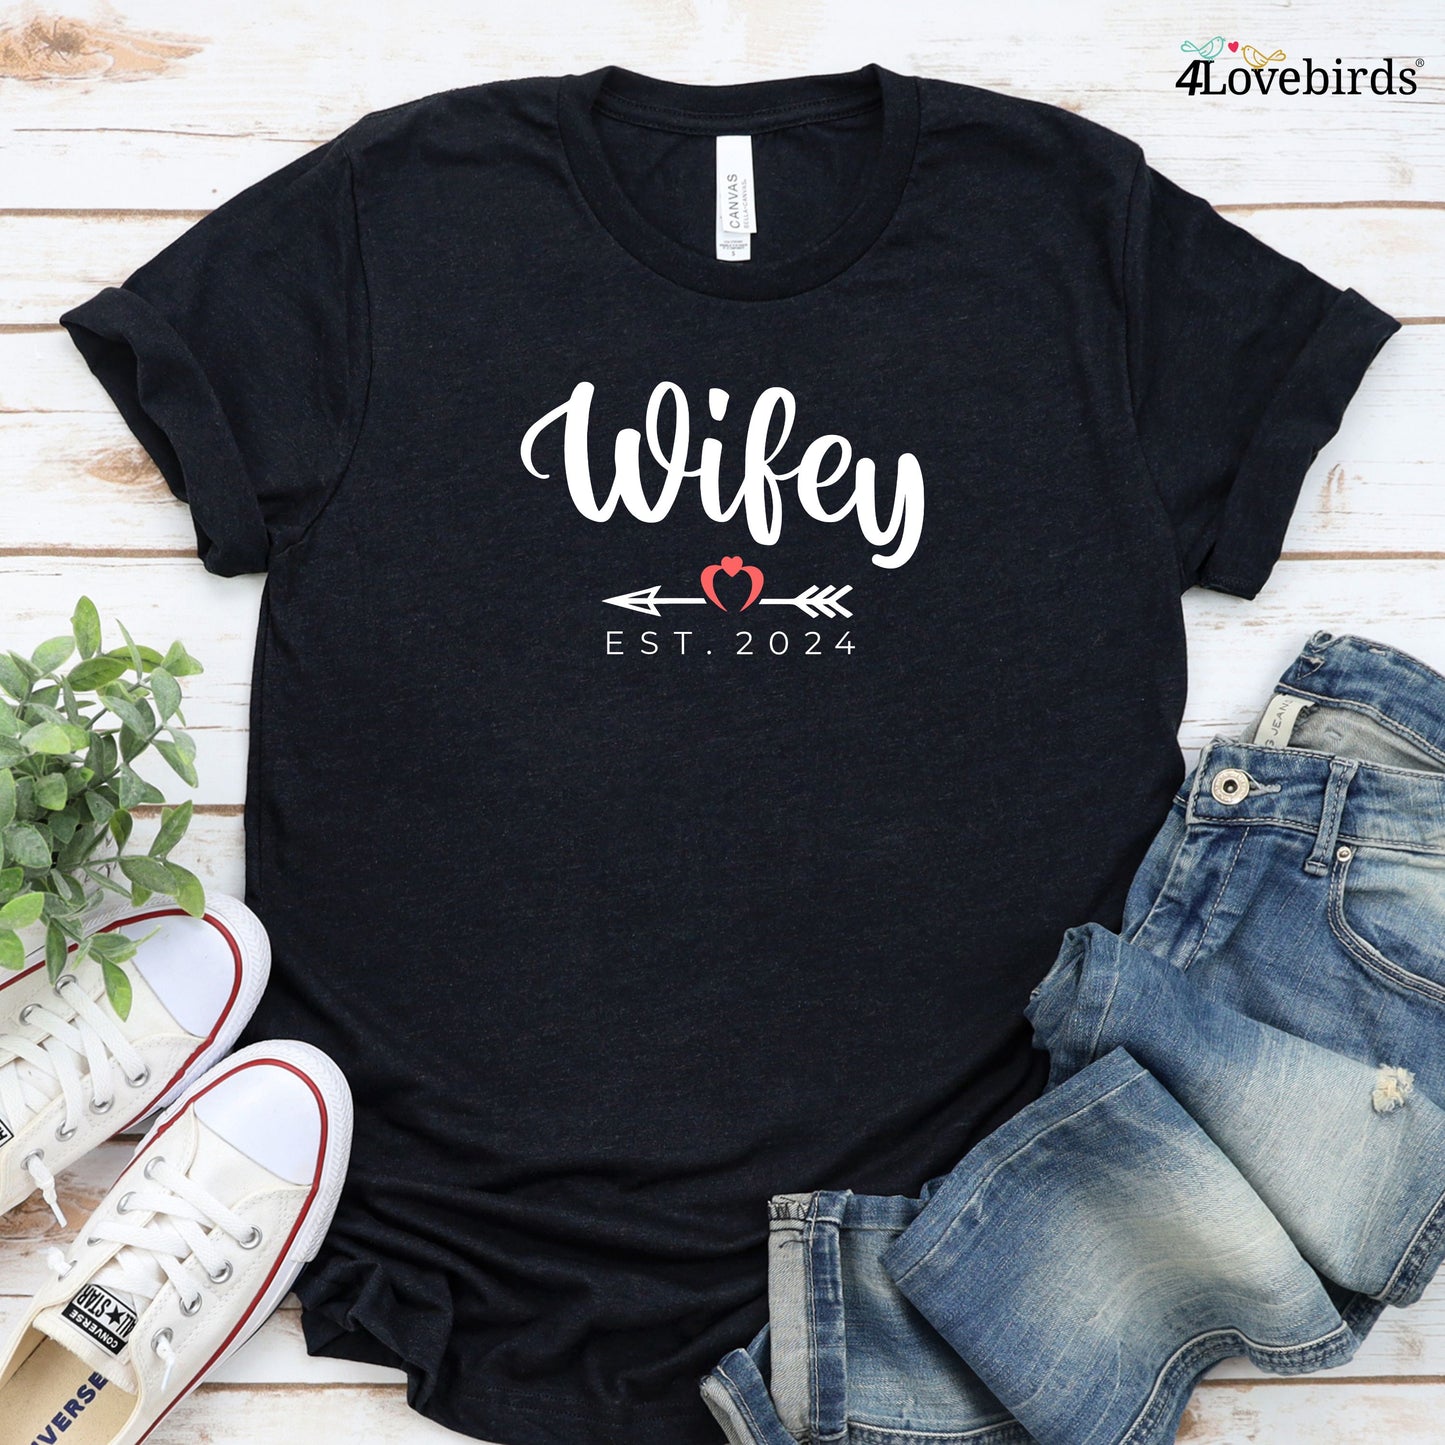 Hubby Wifey Customized Est Date Cozy Matching Outfits - Perfect for Couples